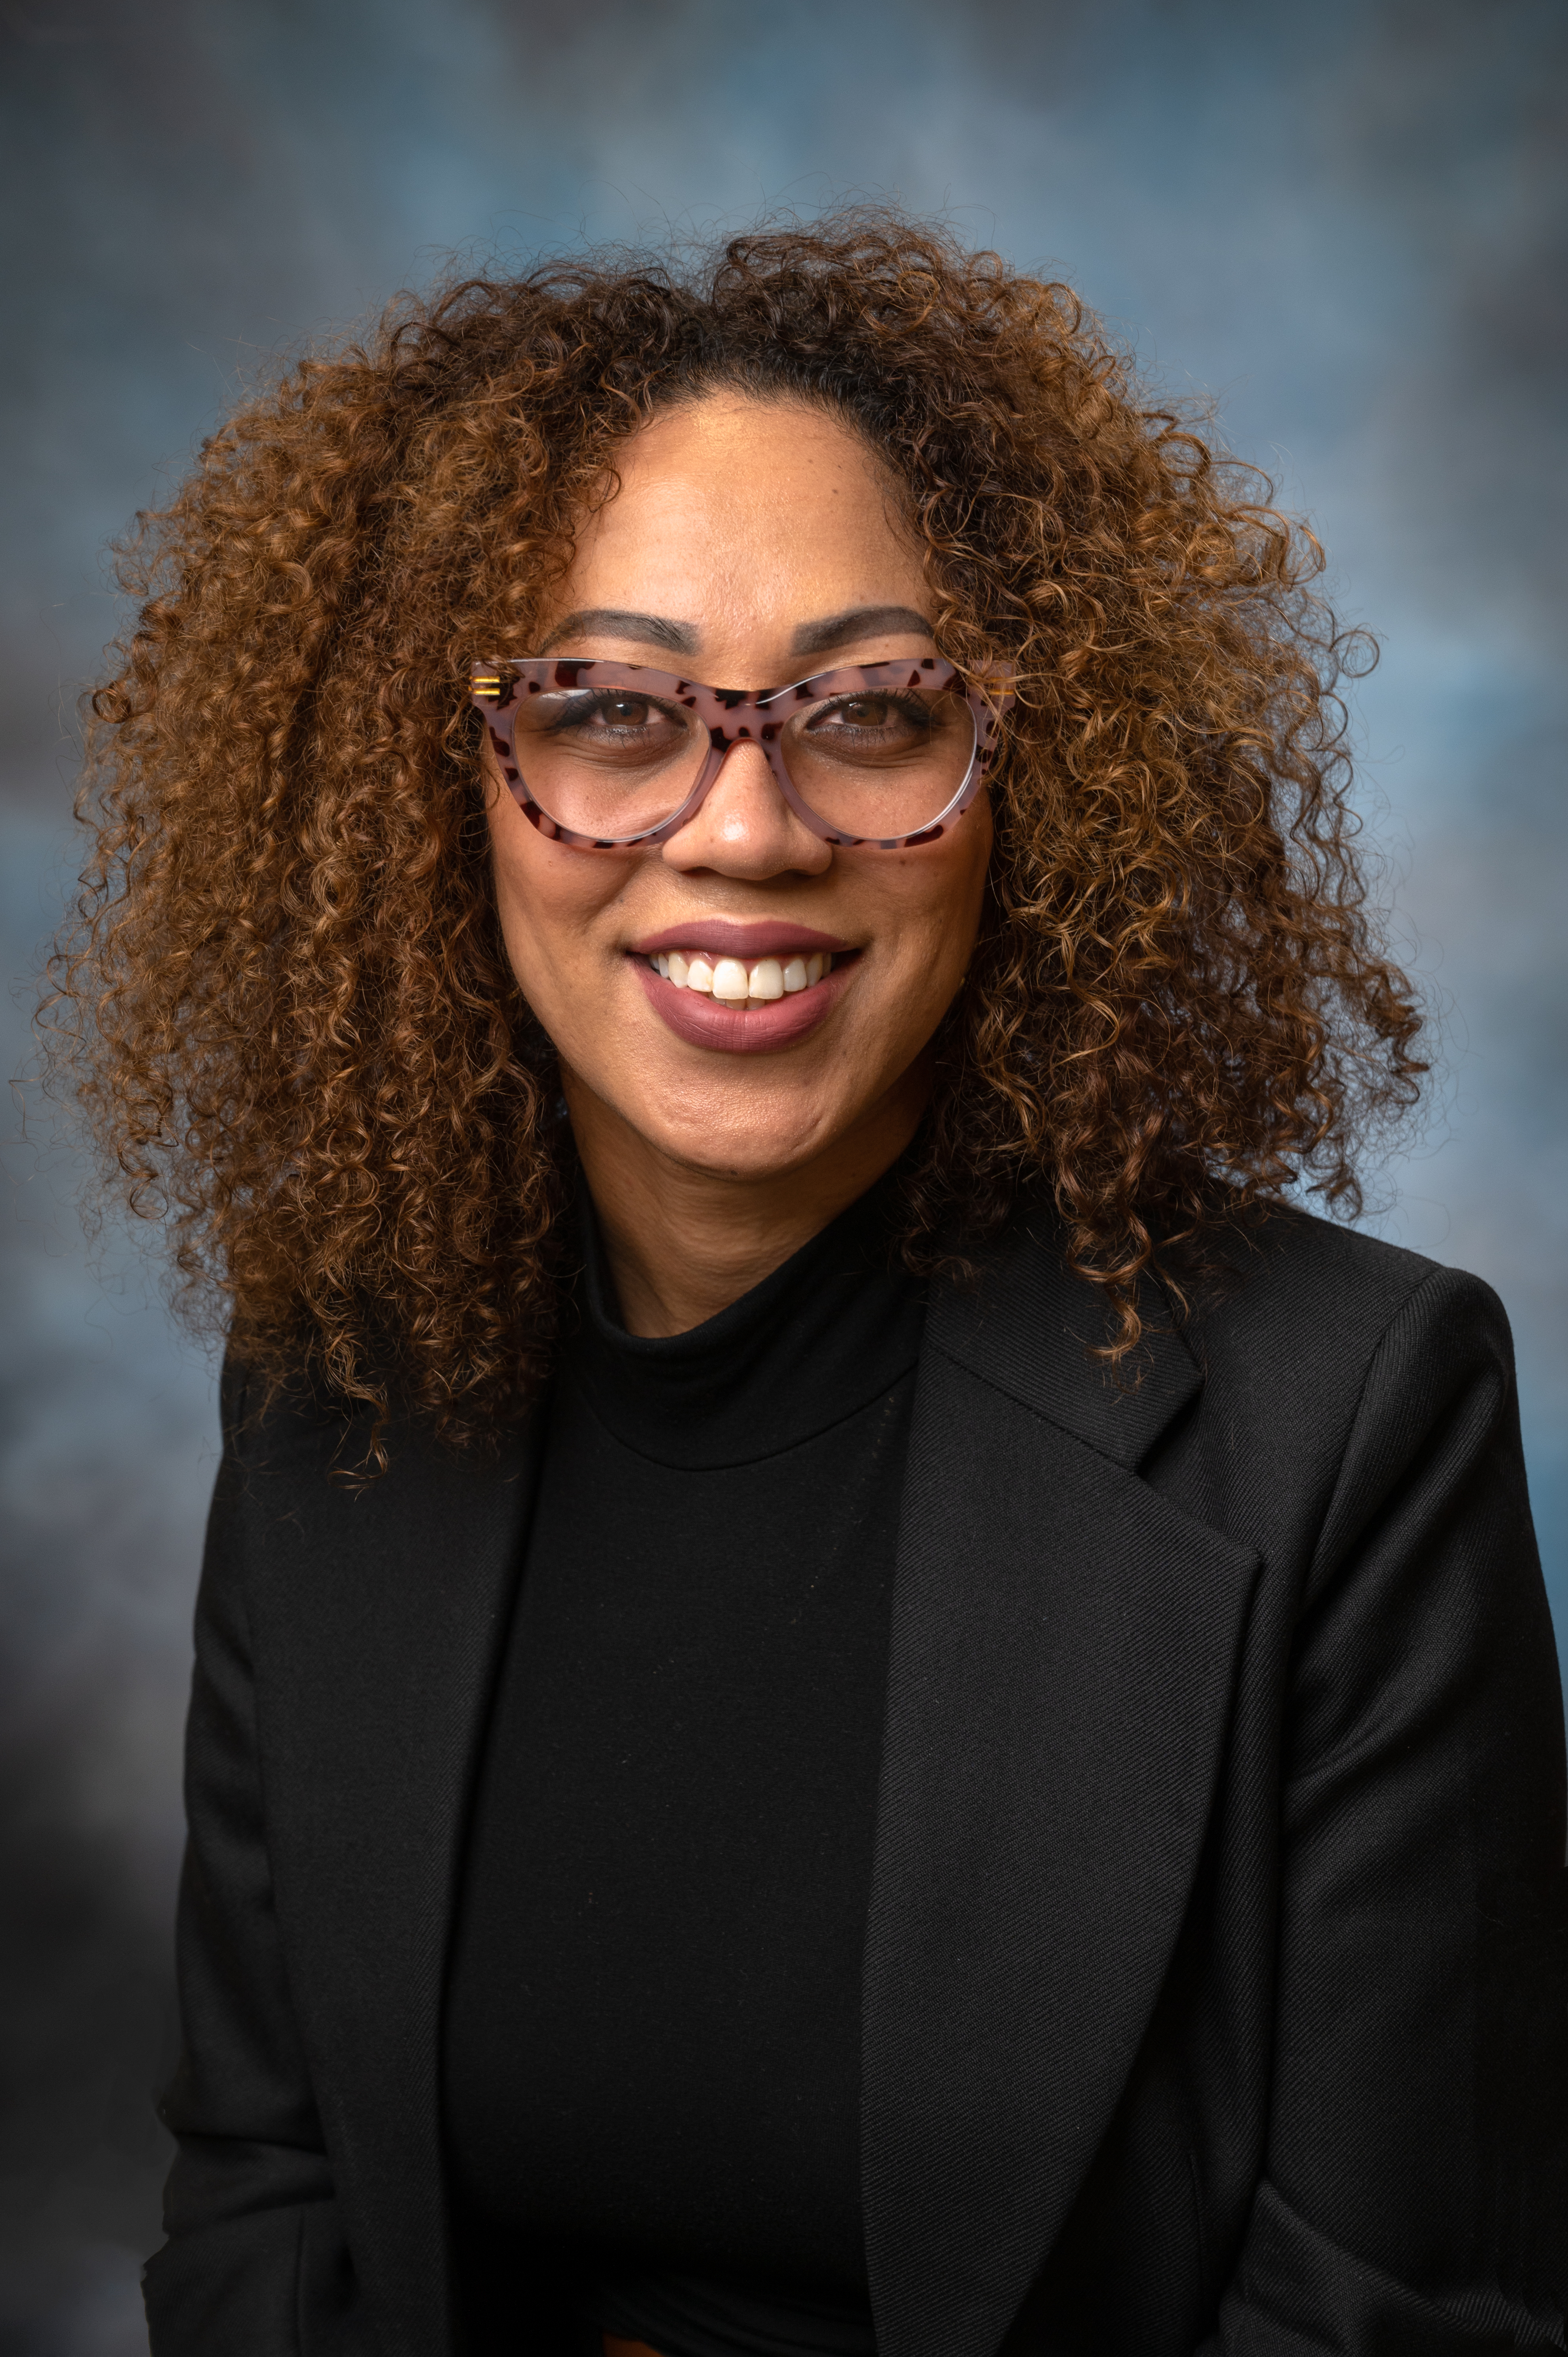 Saint Peter’s Healthcare System Welcomes Brittany Spanos as Executive Director of Community Outreach and Diversity Officer